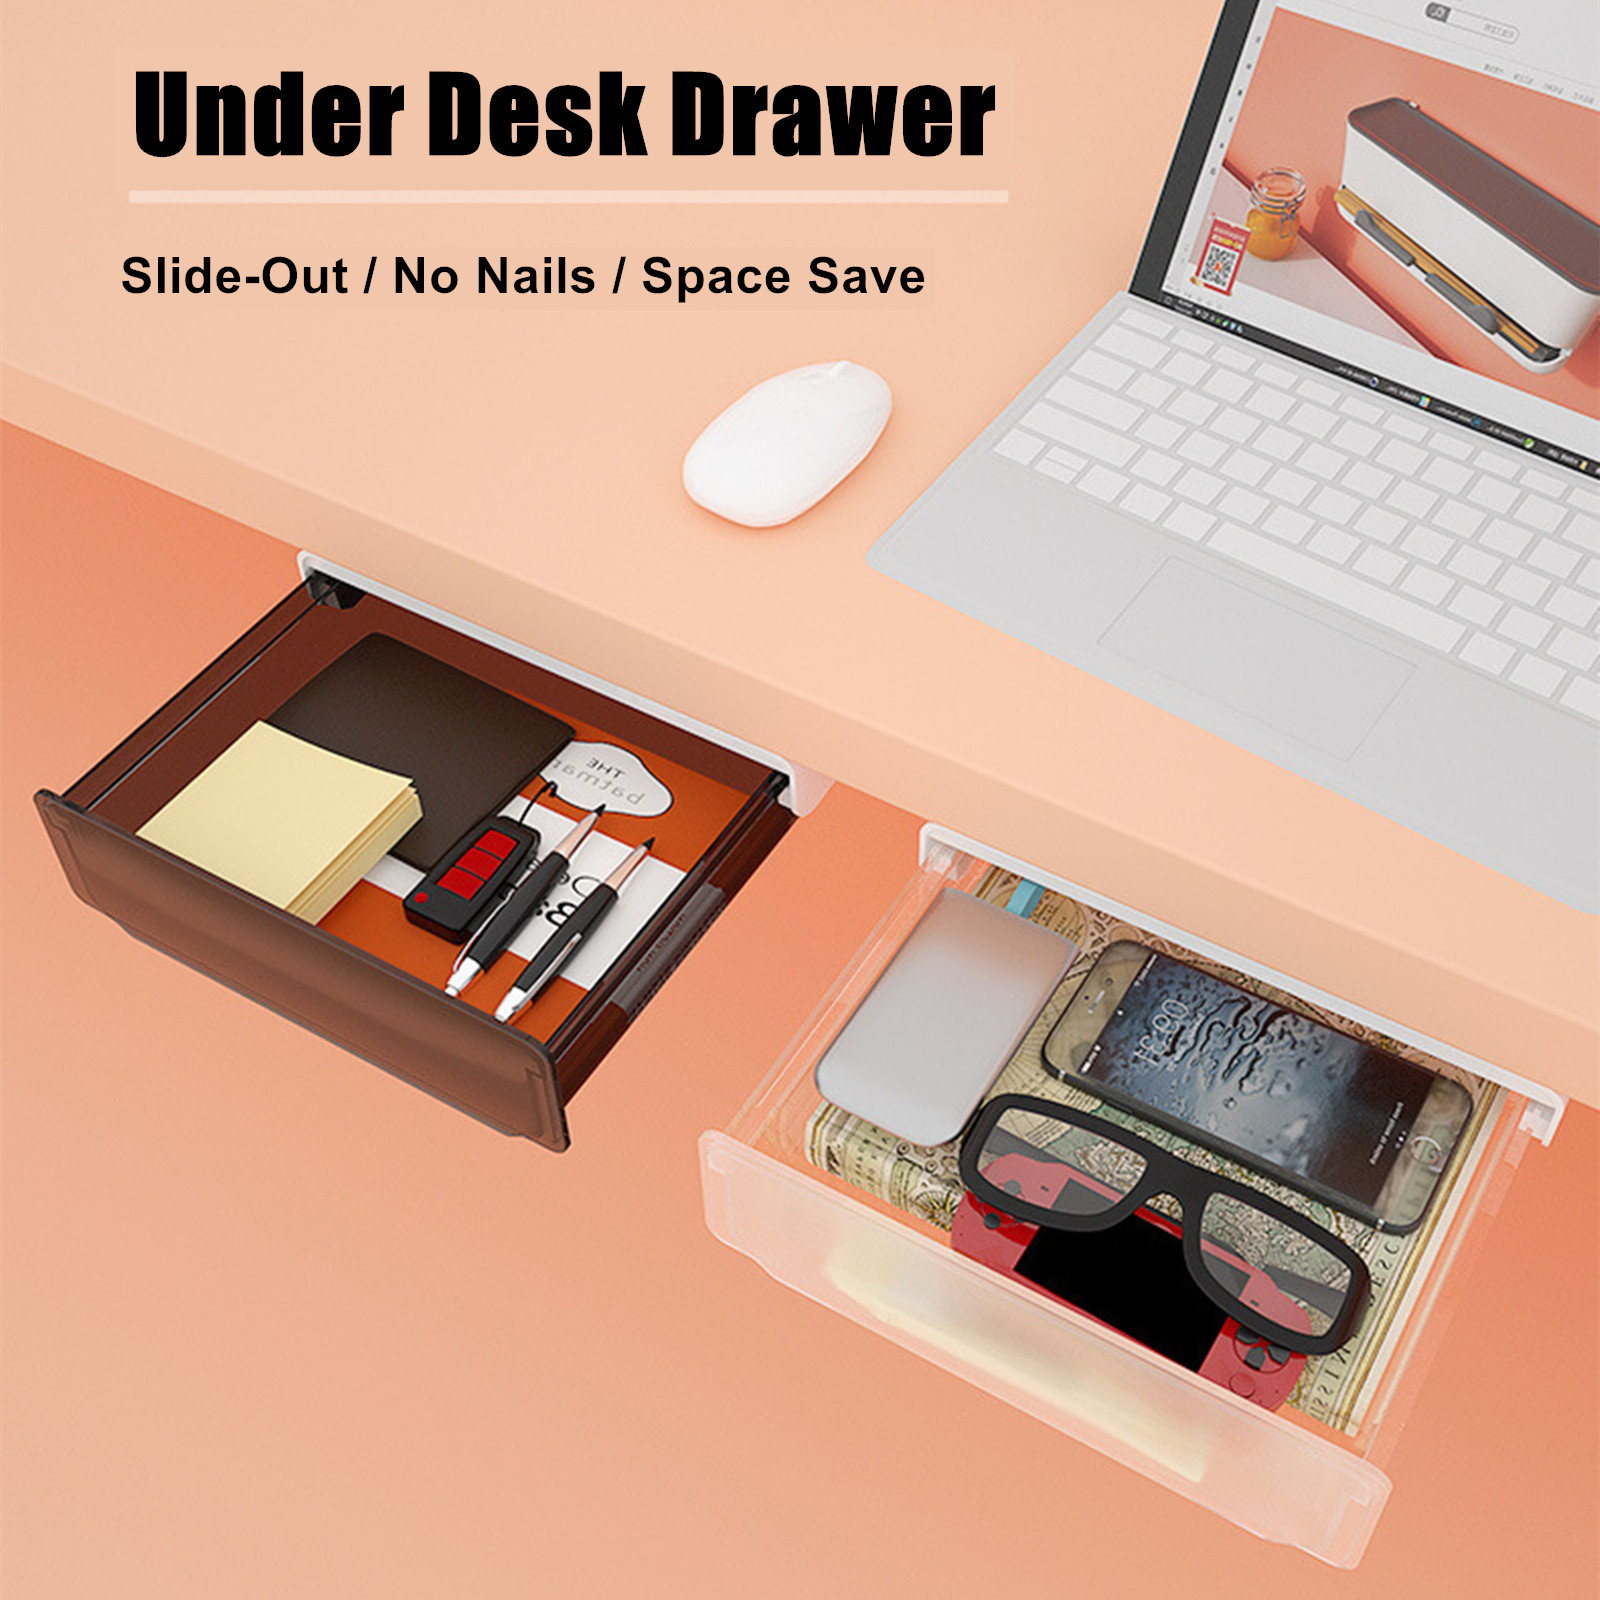 Under Desk Drawer Slide-out Large Office Organizers and Storage Drawers – Small, Clear